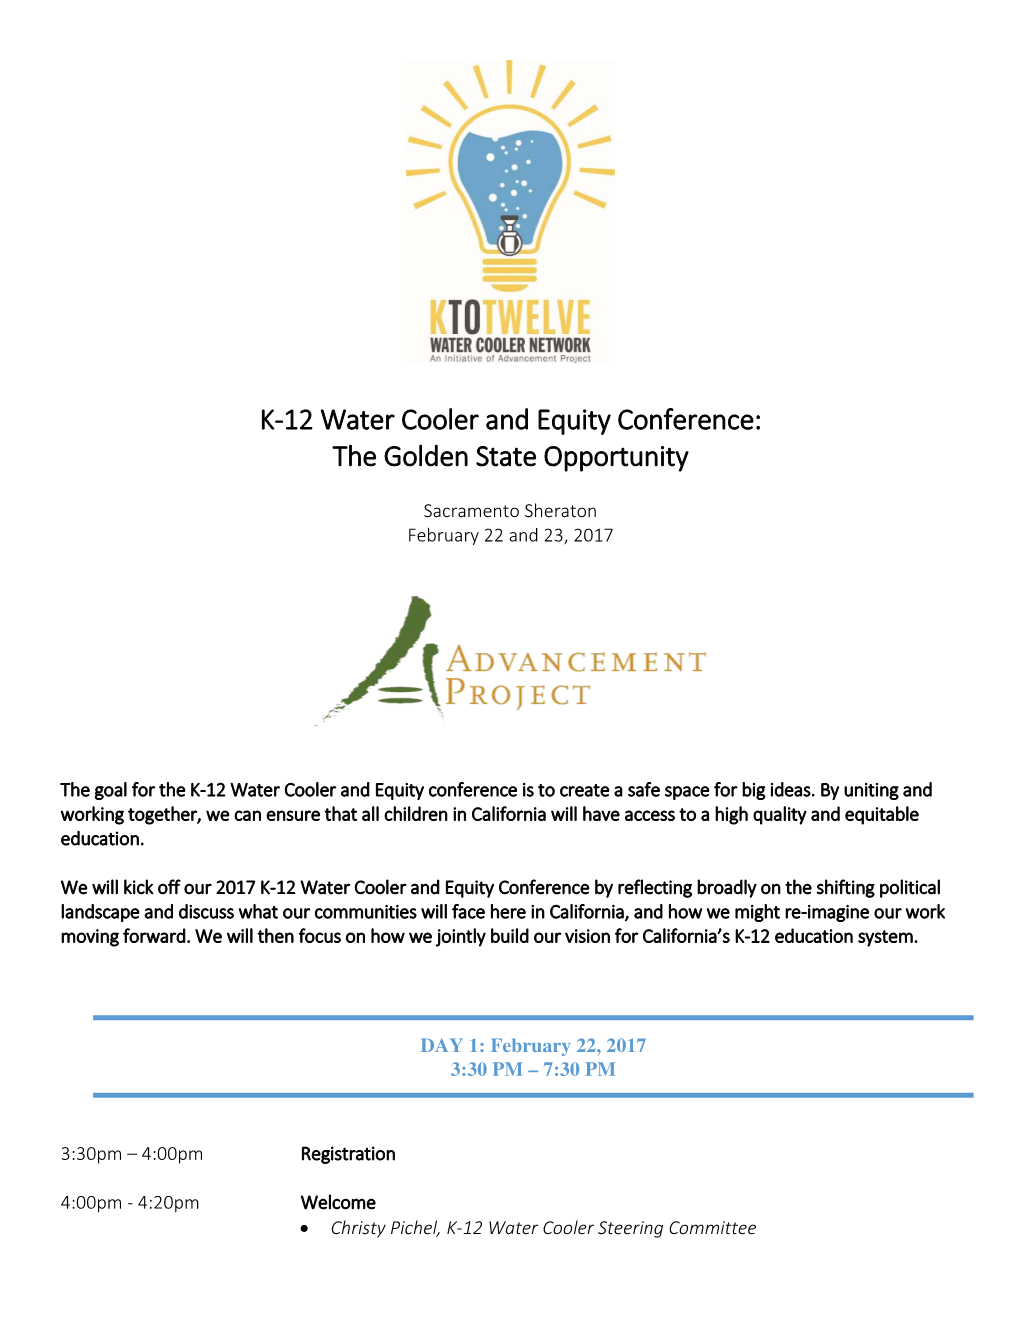 K-12 Water Cooler and Equity Conference: the Golden State Opportunity